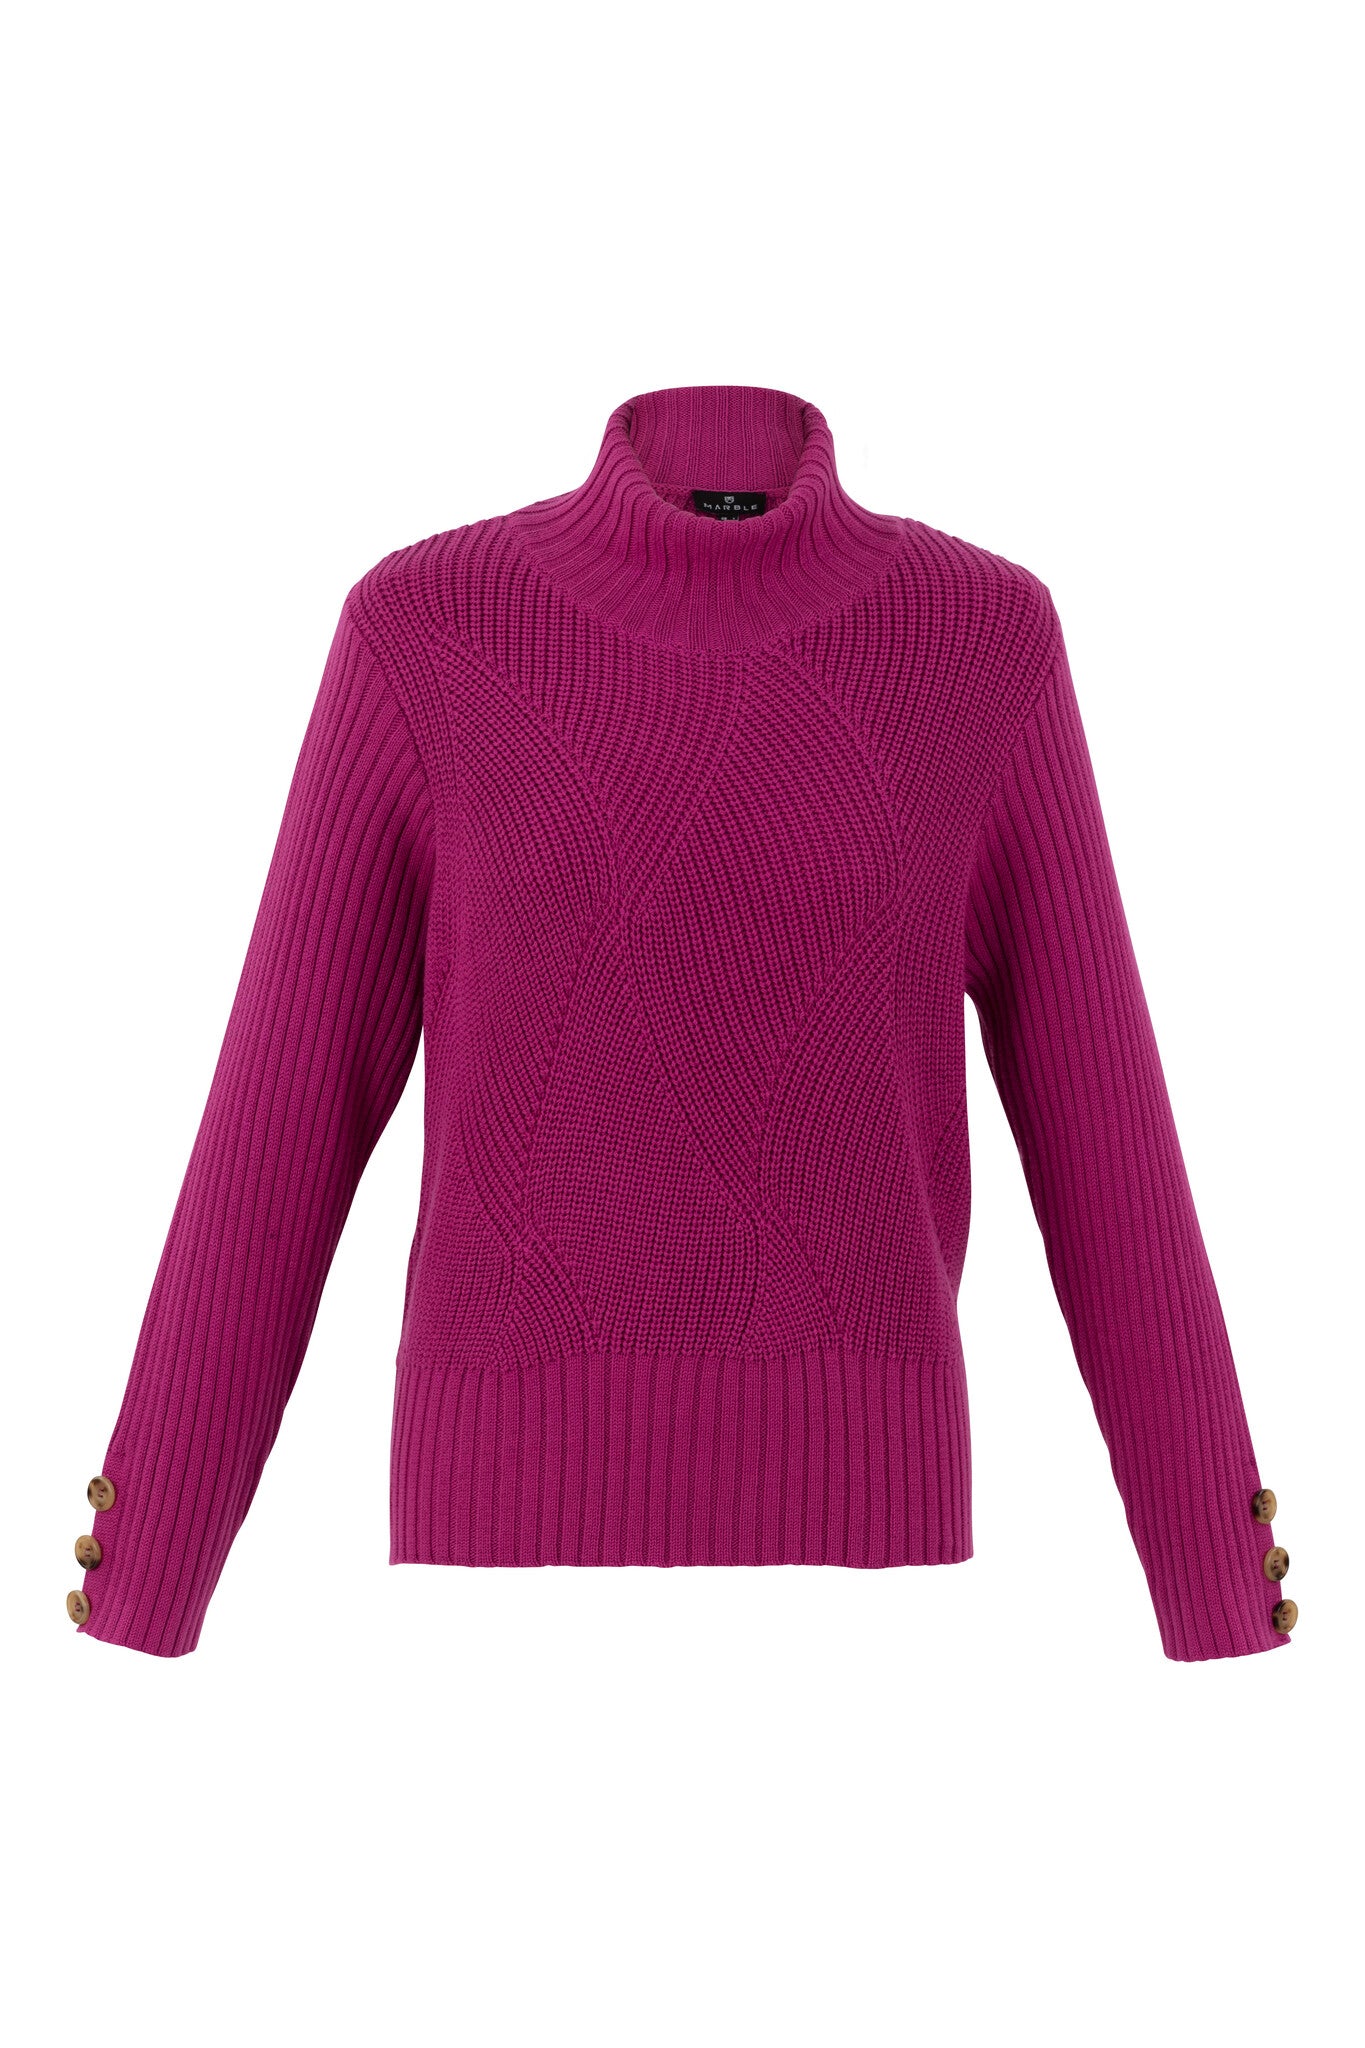 Marble Ribbed Funnel Neck Sweater w/Button Detail Dark Pink 7201-206